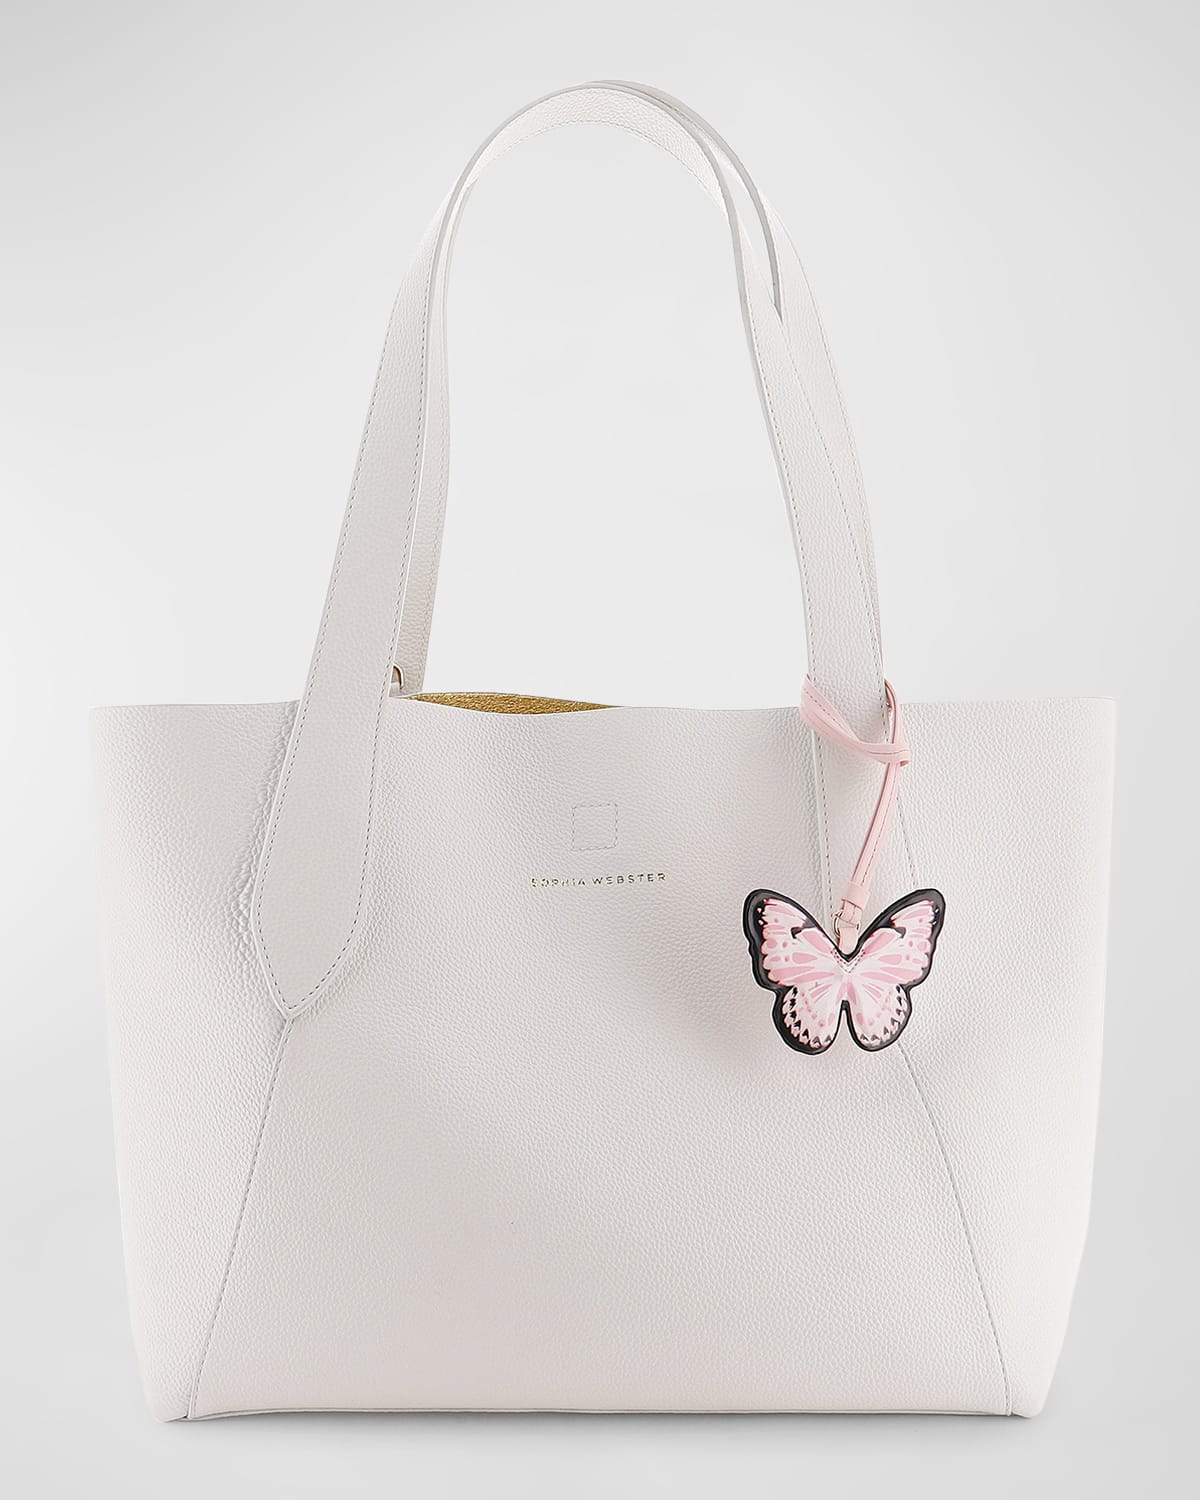 Sophia Webster Hola Butterfly Leather Tote Bag In White